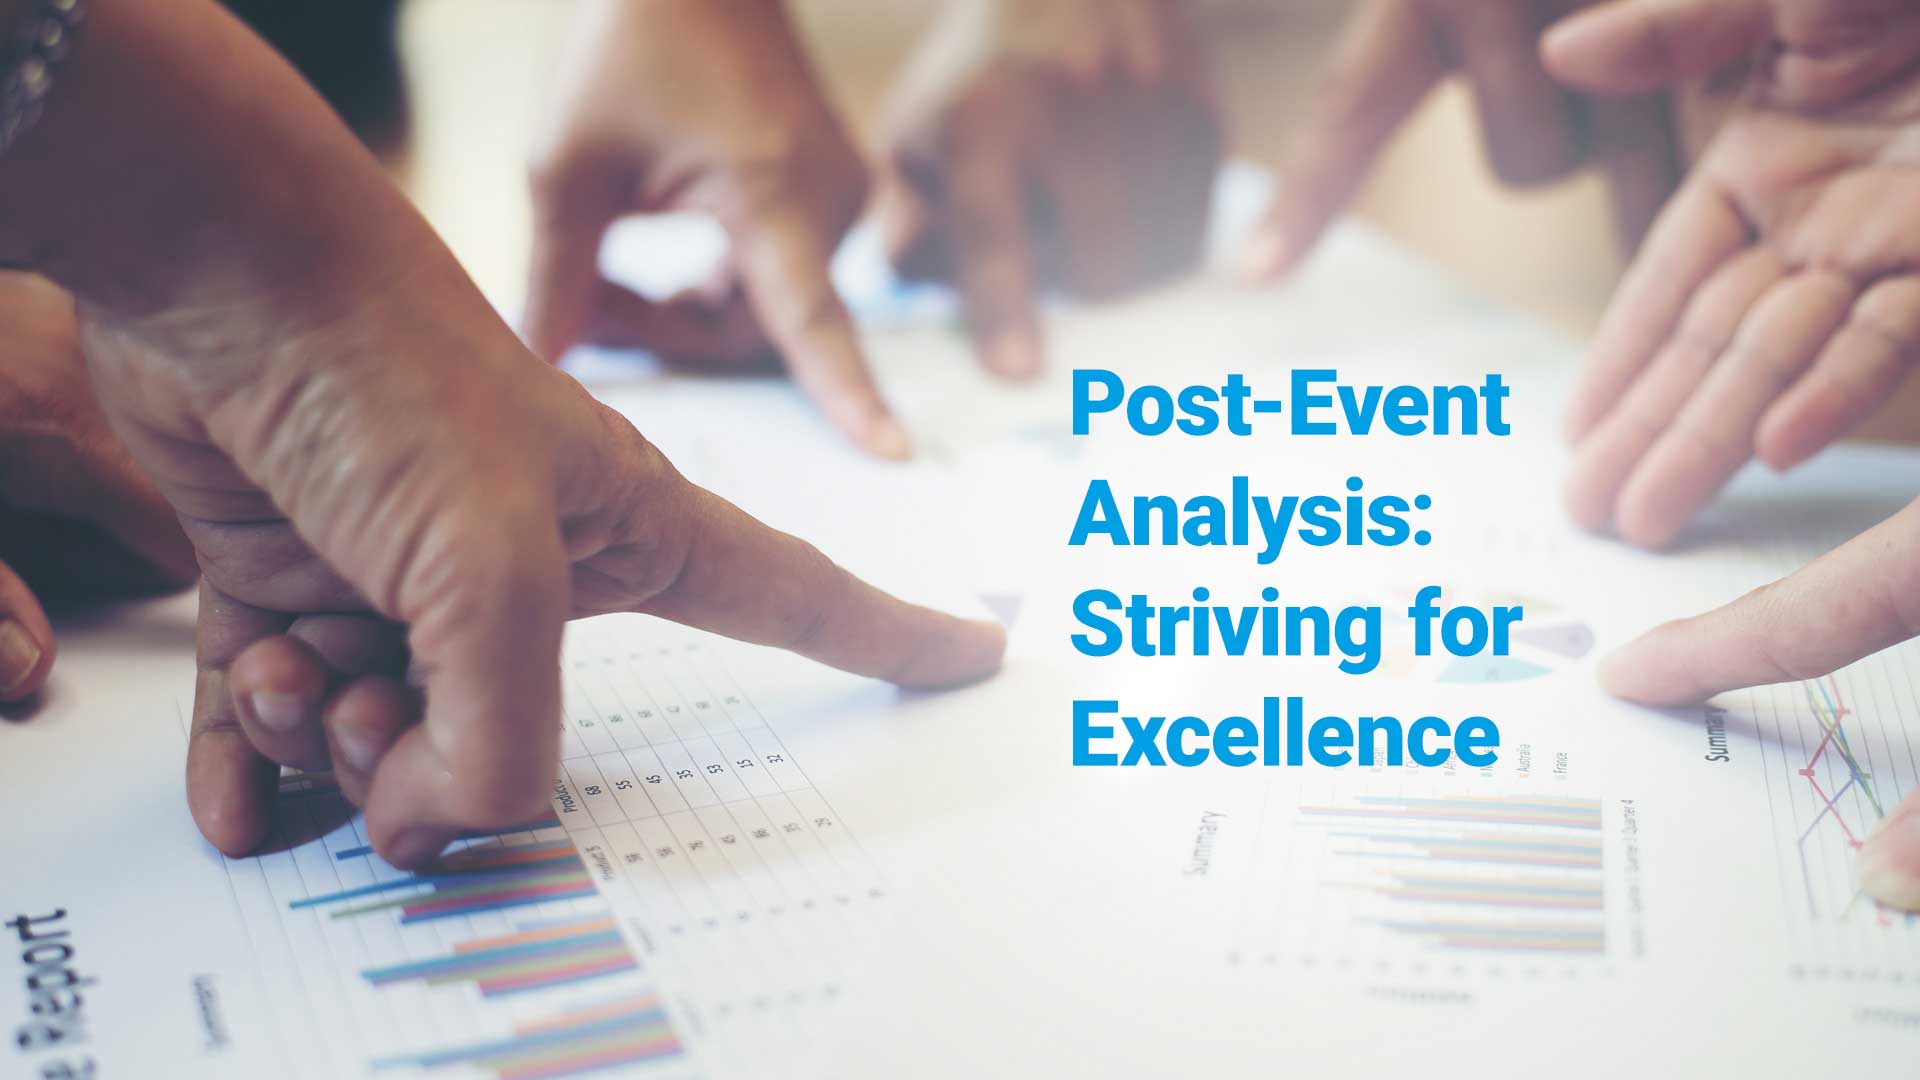 Post-Event Analysis: Striving for Excellence